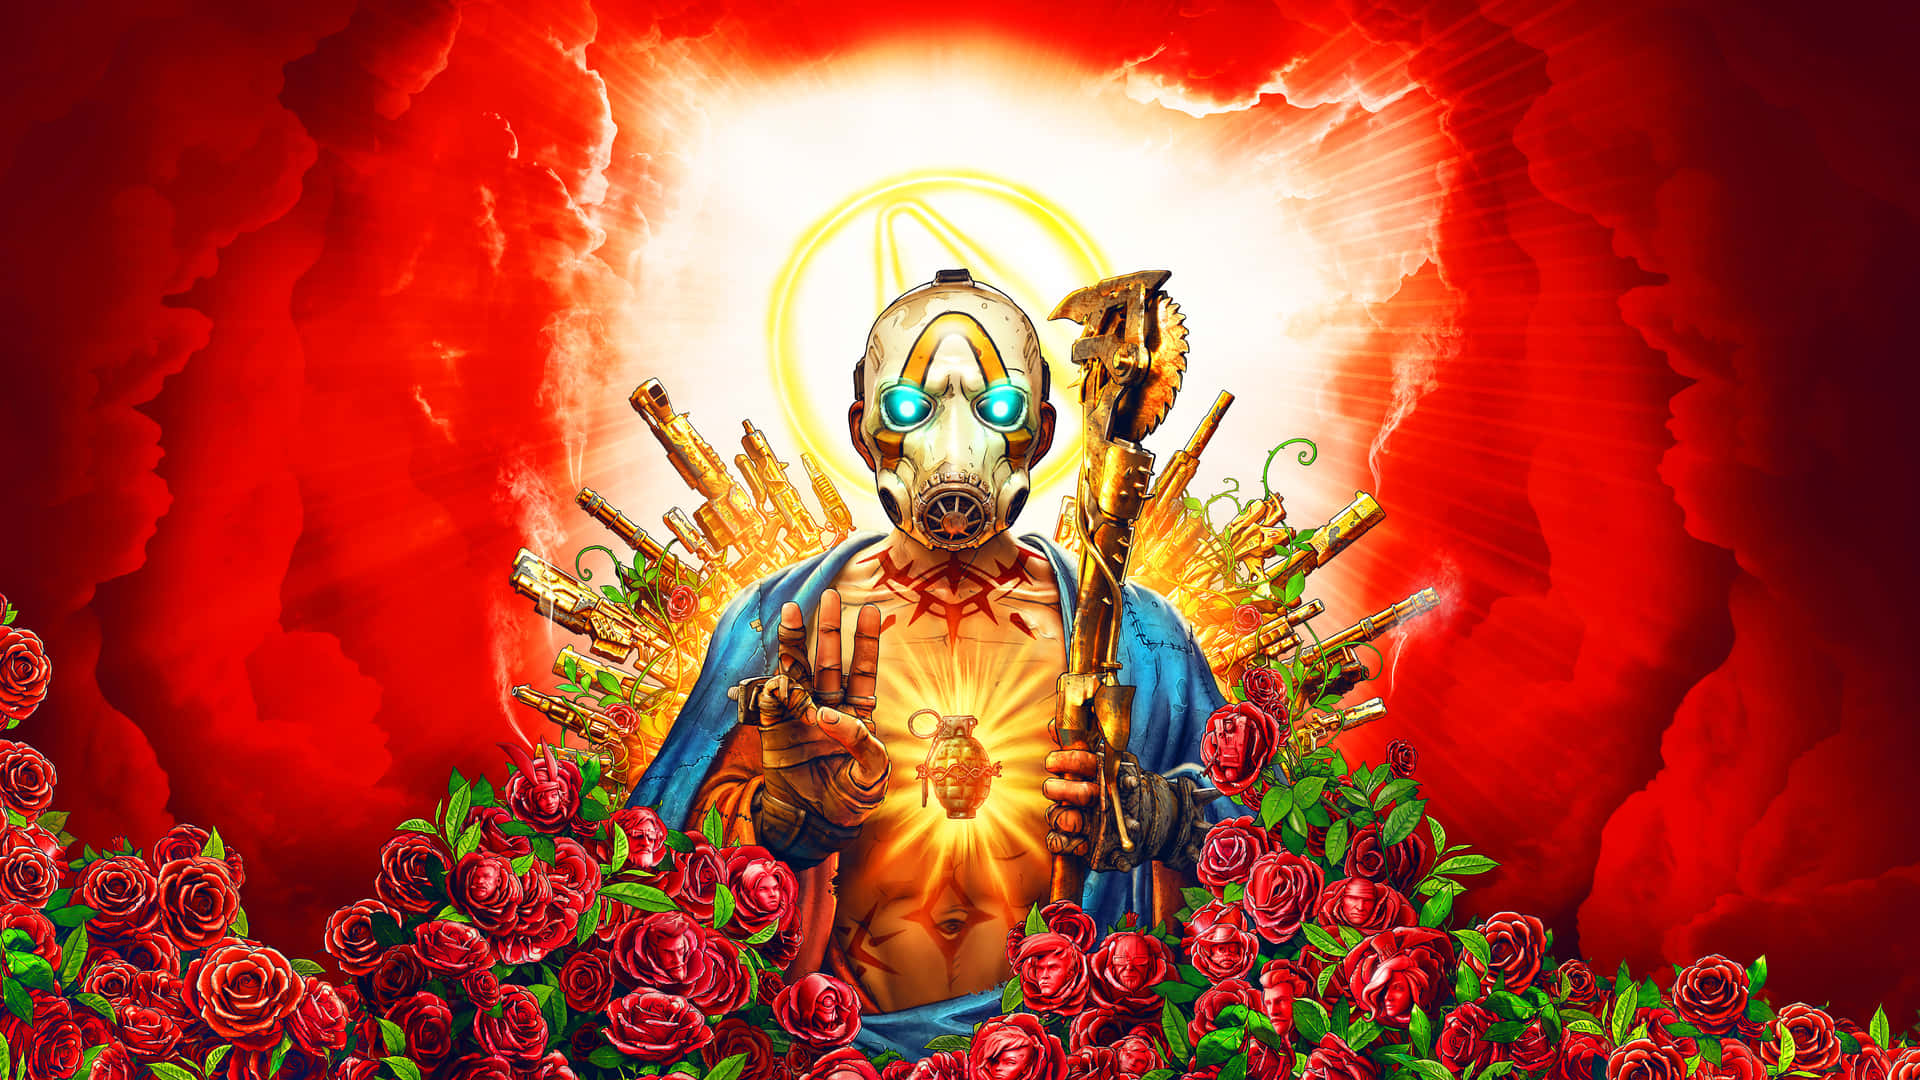 Borderlands 2 - A Man With A Sword And Roses Wallpaper